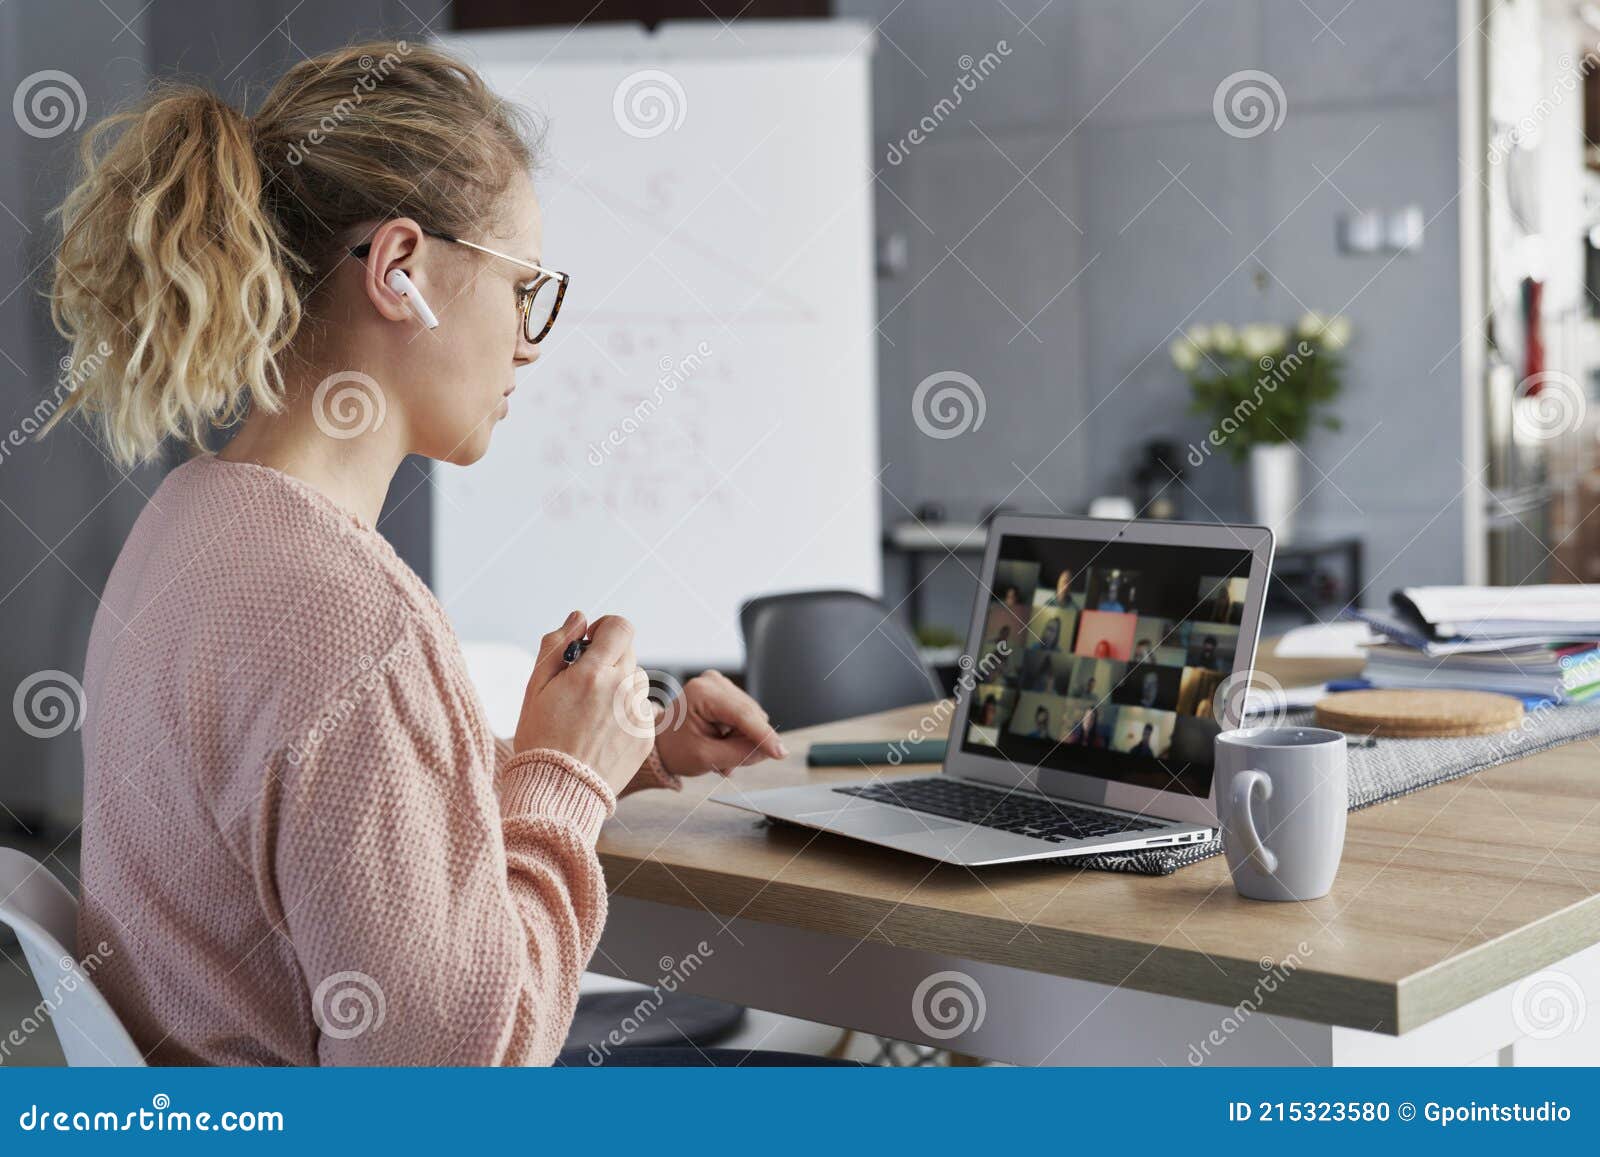 teacher while conducting online classes